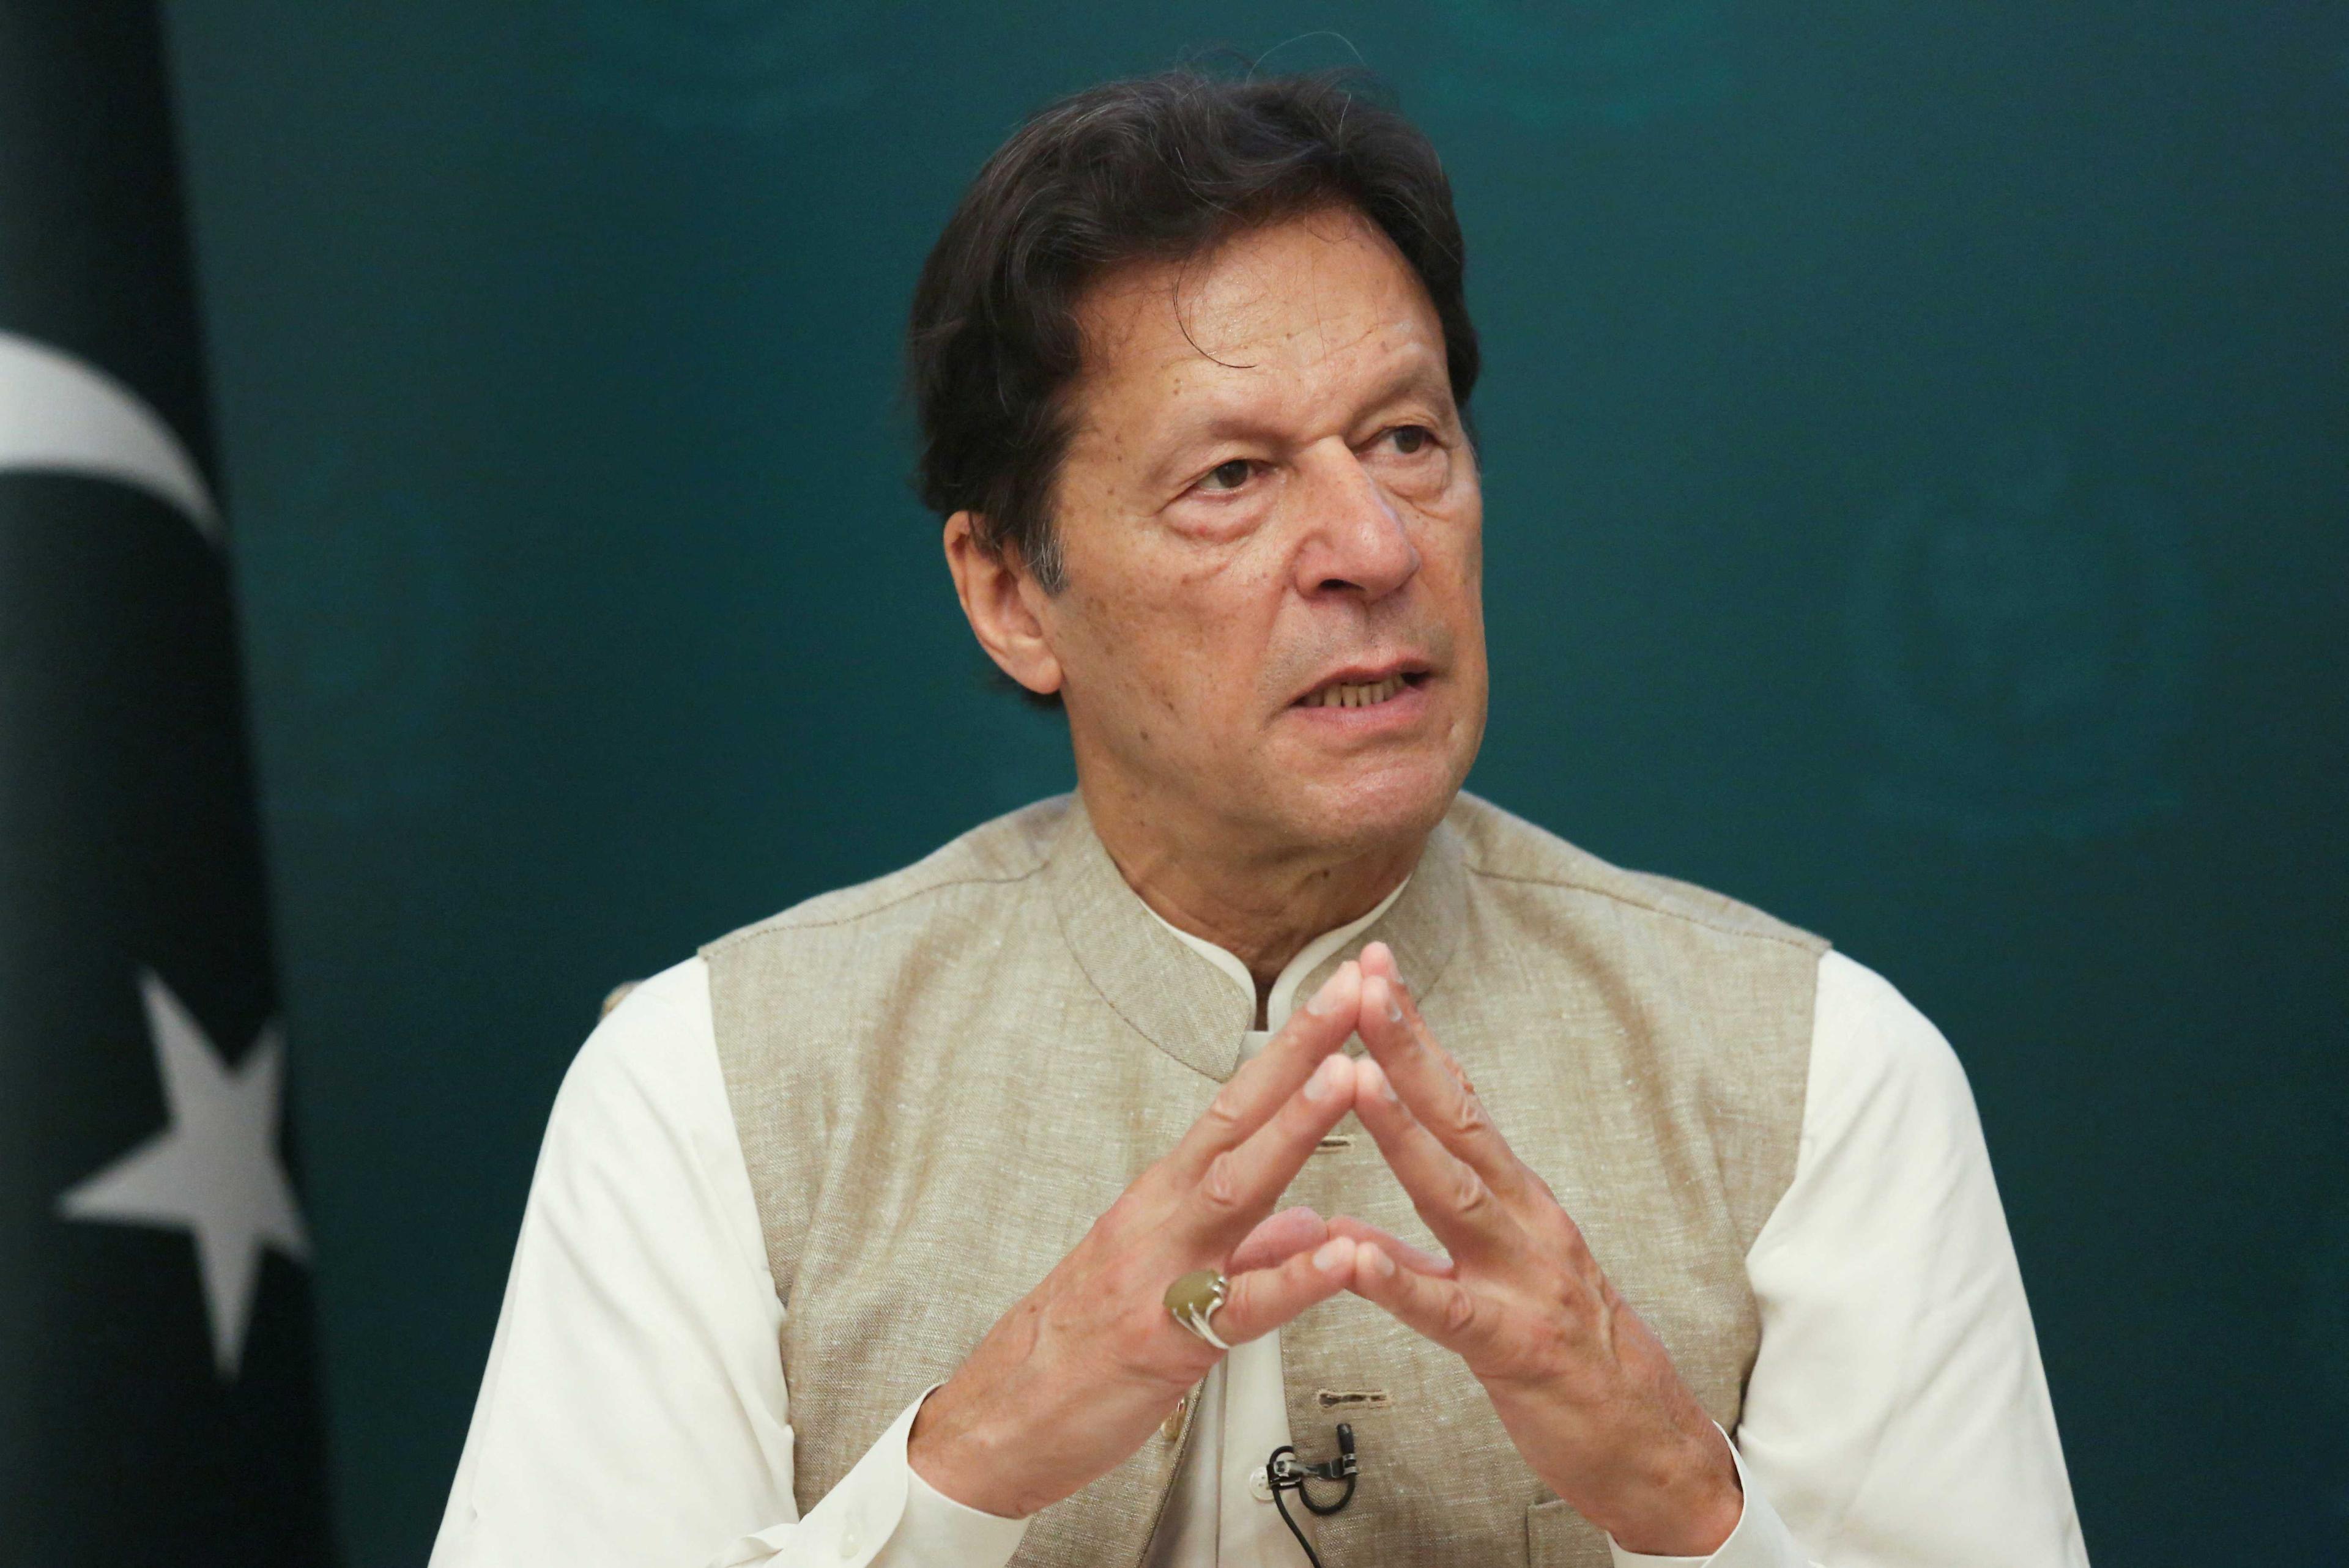 Pakistan's former prime minister Imran Khan speaks during an interview with in Islamabad, Pakistan June 4, 2021. Photo: Reuters